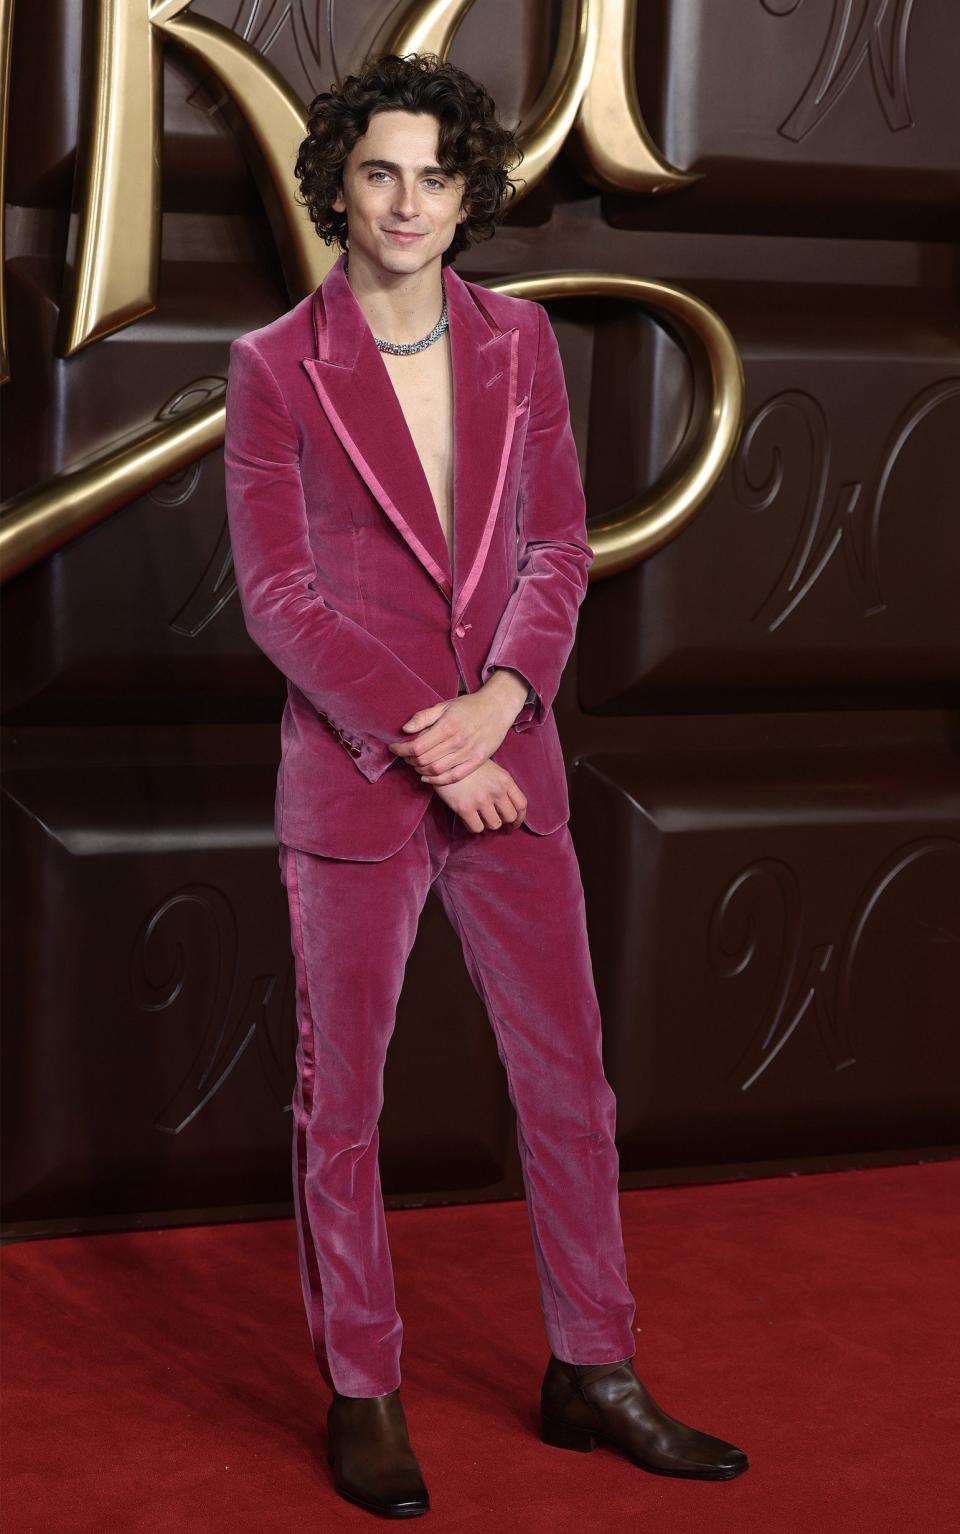 Timothée Chalamet in a Tom Ford womenswear suit at the world premiere of Wonka in London, November 28